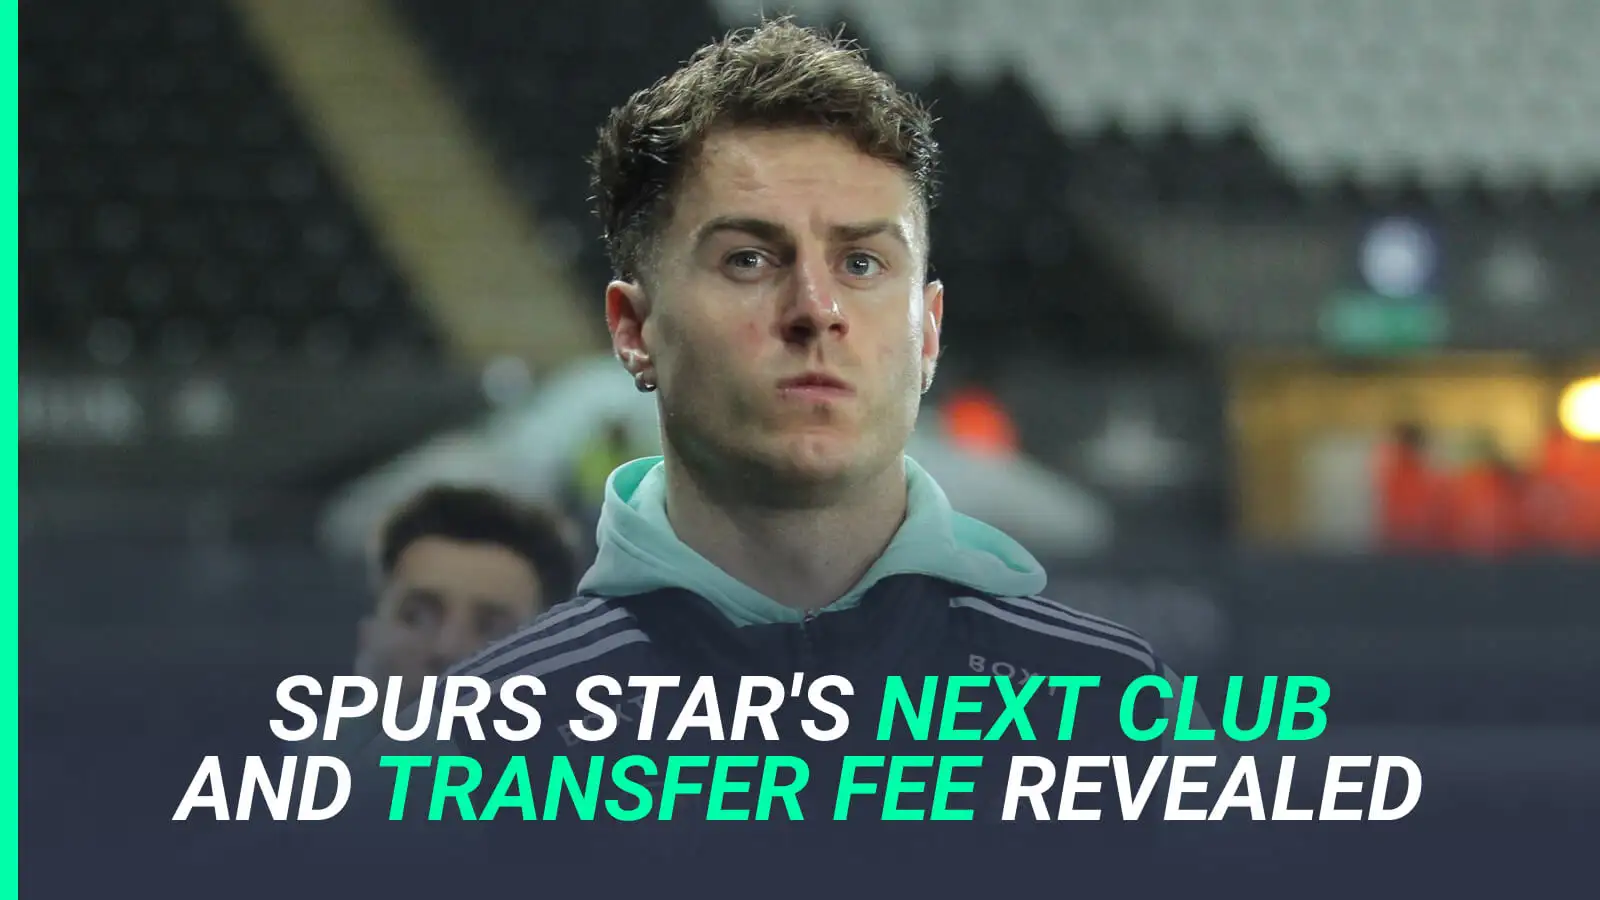 Game over for Tottenham star who’ll be sold this summer; next club and transfer fee already clear